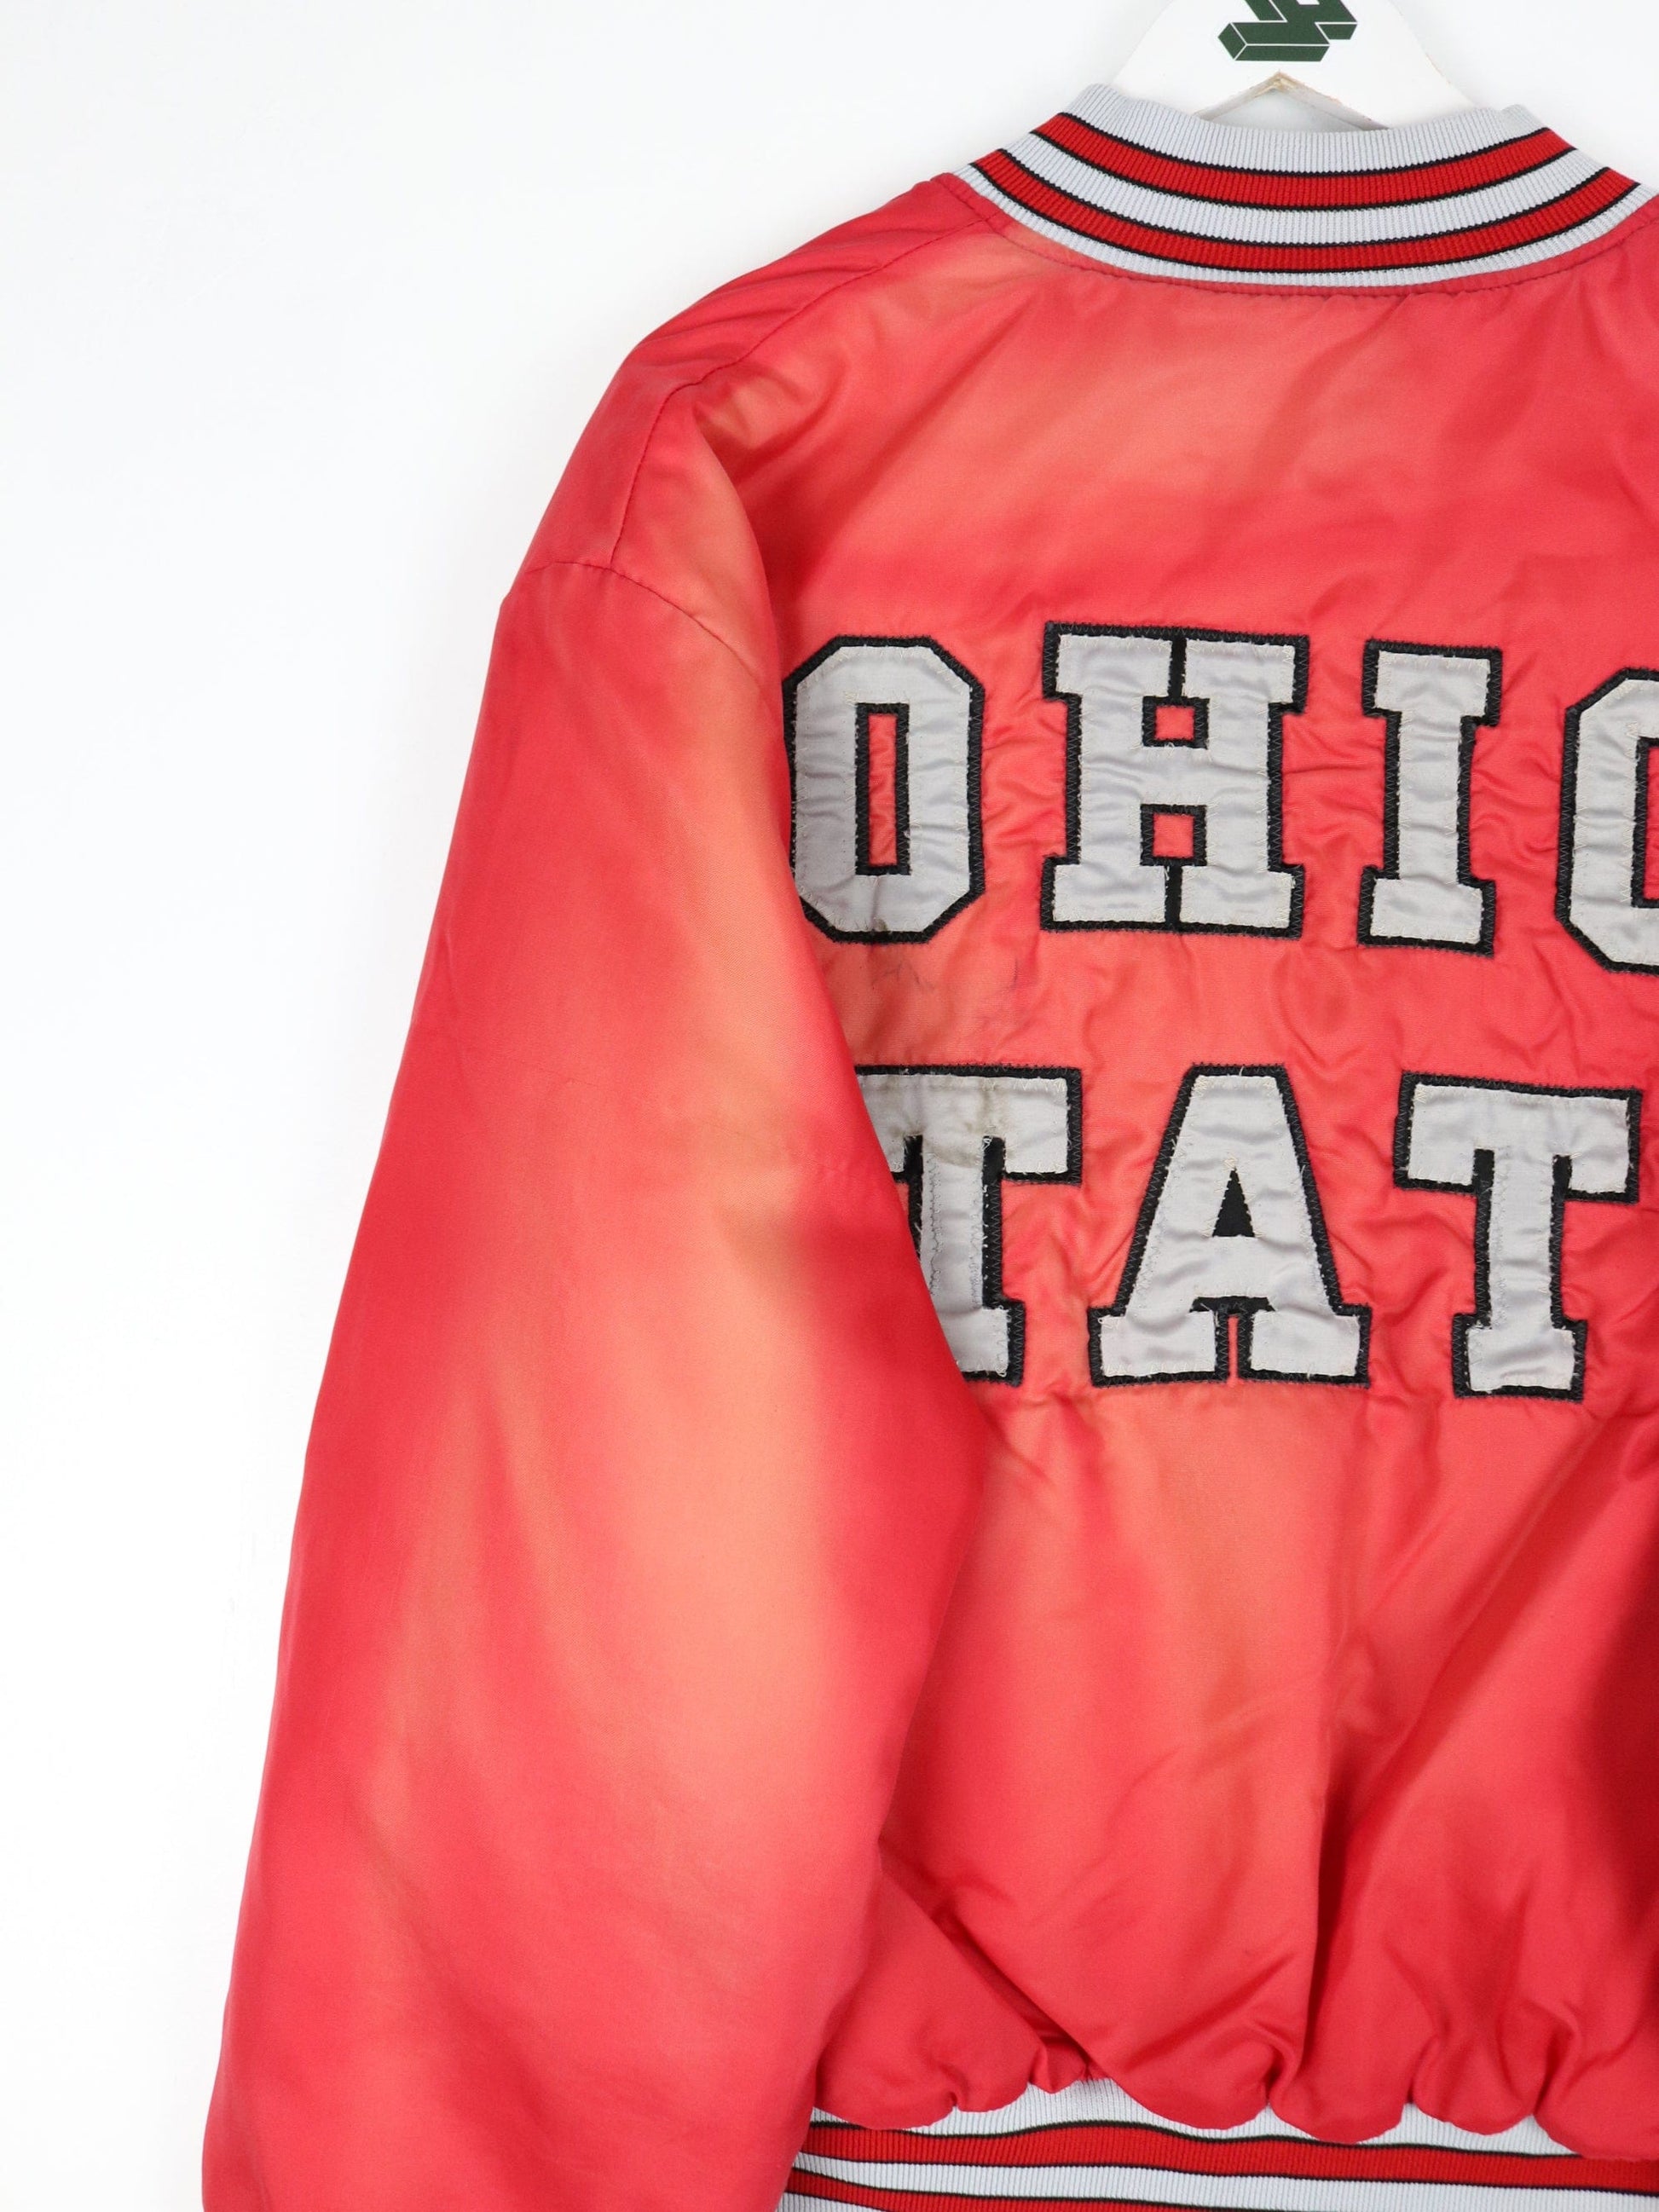 Collegiate Jackets & Coats Vintage Ohio State Buckeyes Jacket Mens 2XL Red College Bomber